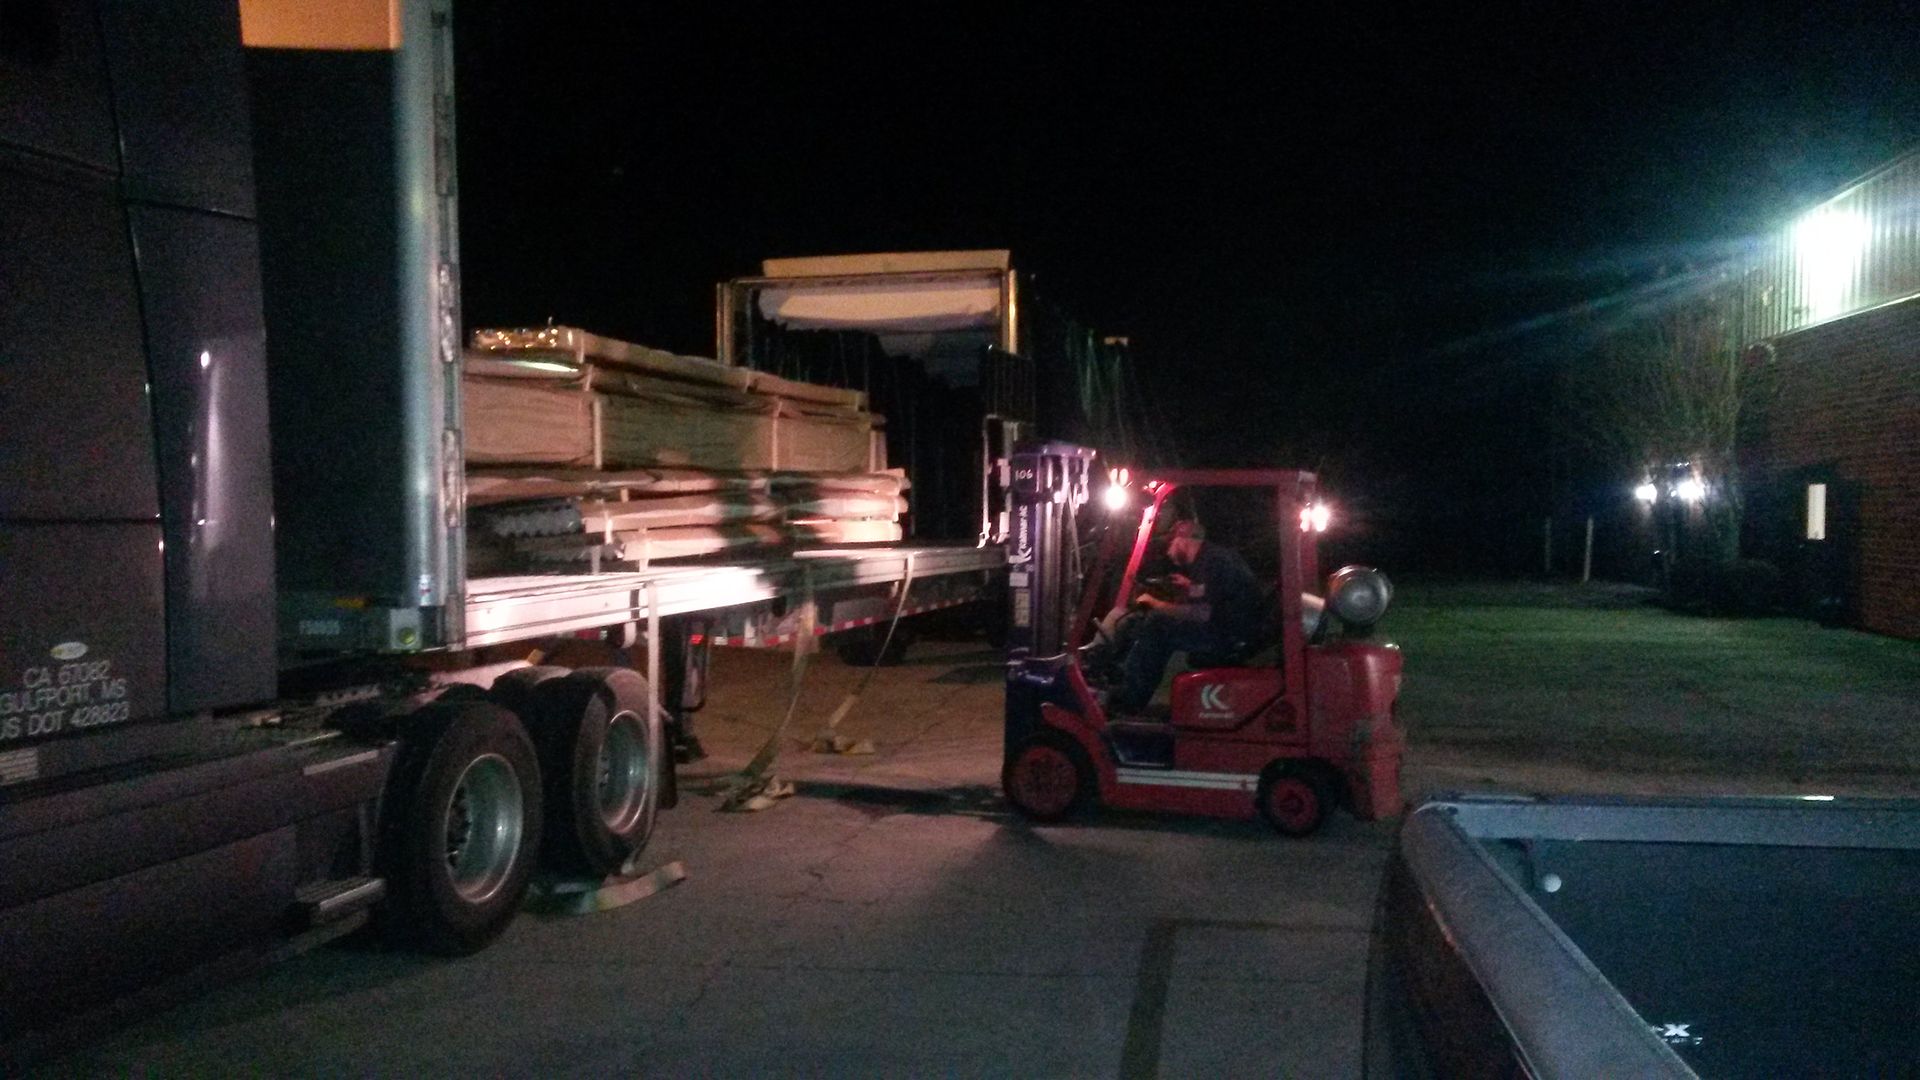 Unloading lumber from a flatbed truck at night